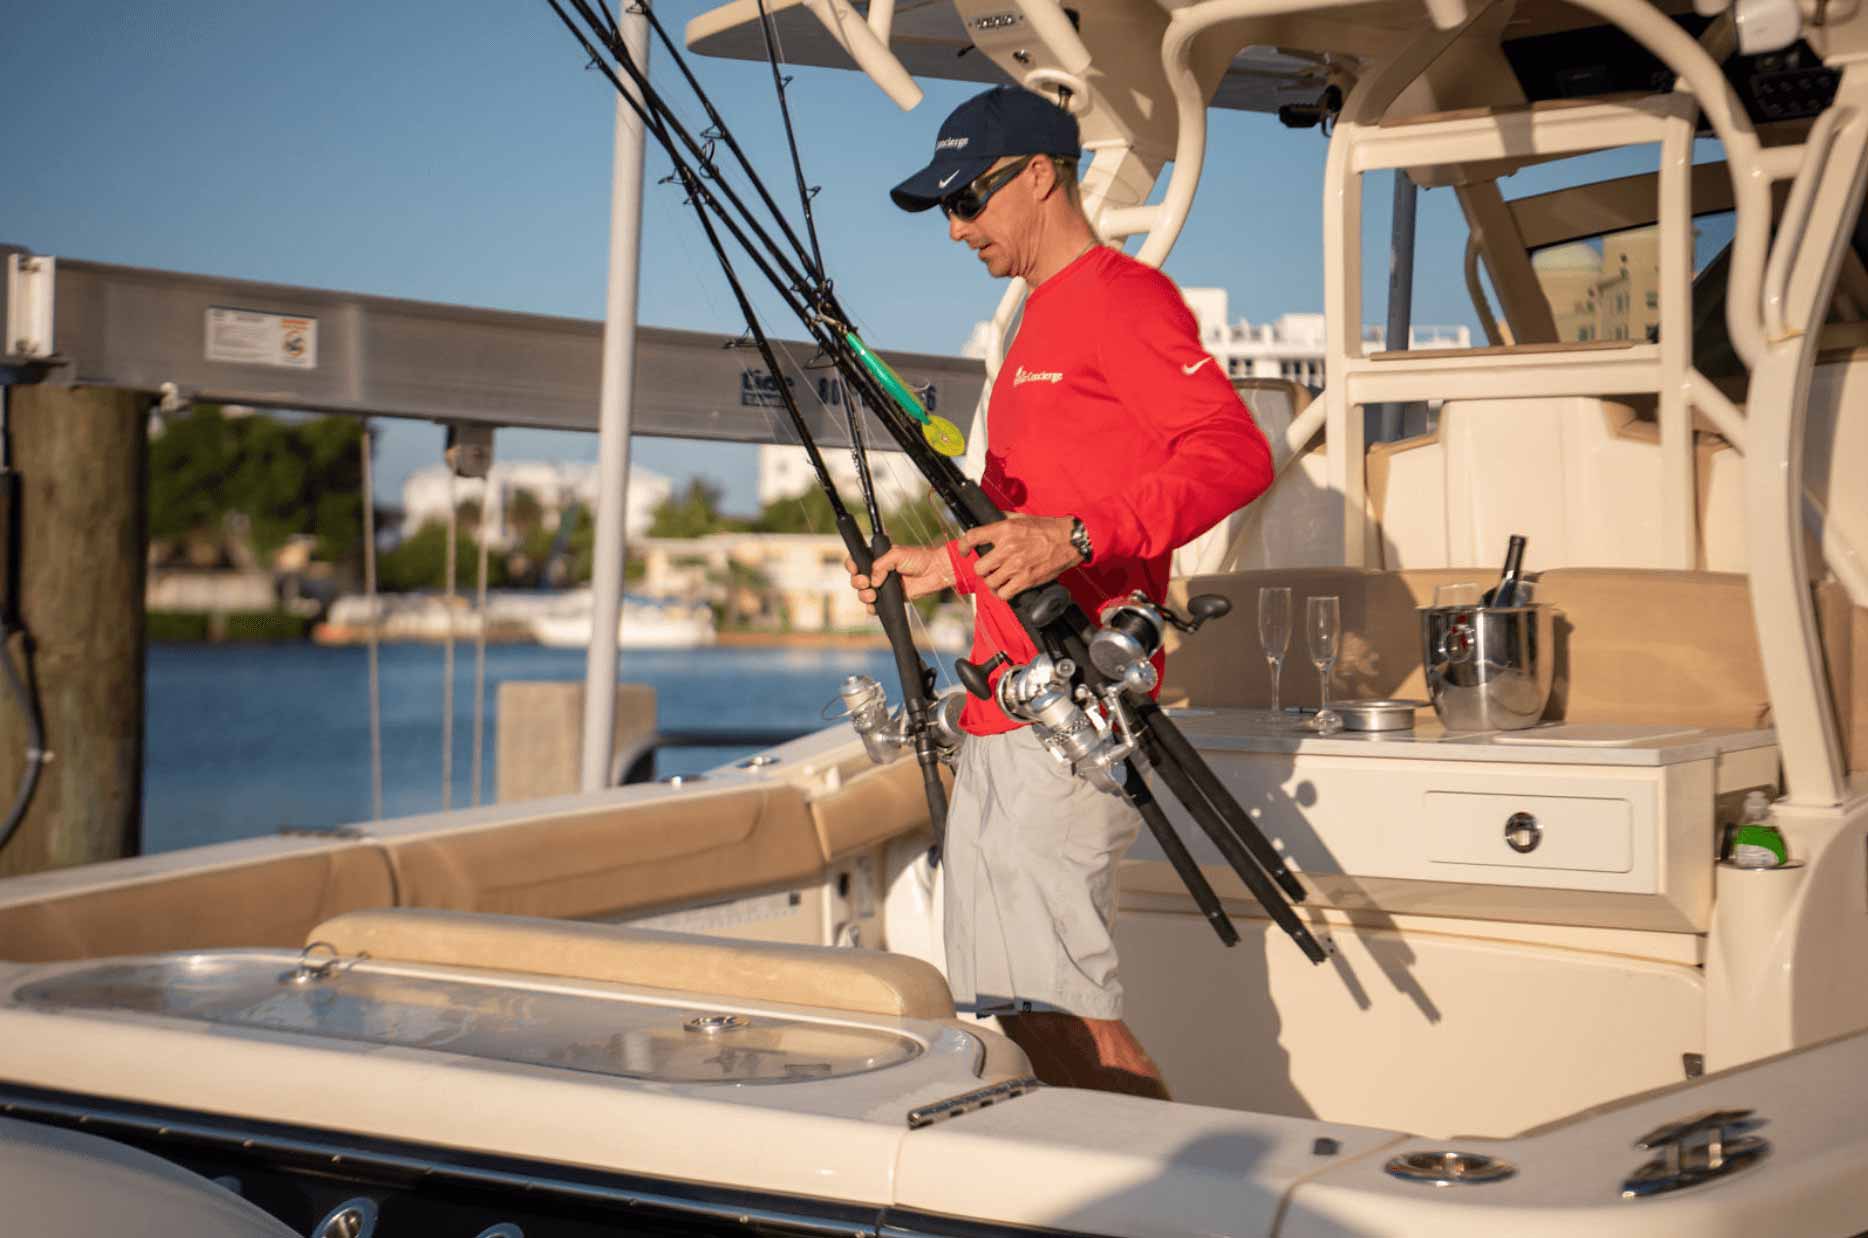 Captain Gabe on the boat holding fishing rods boat concierge services